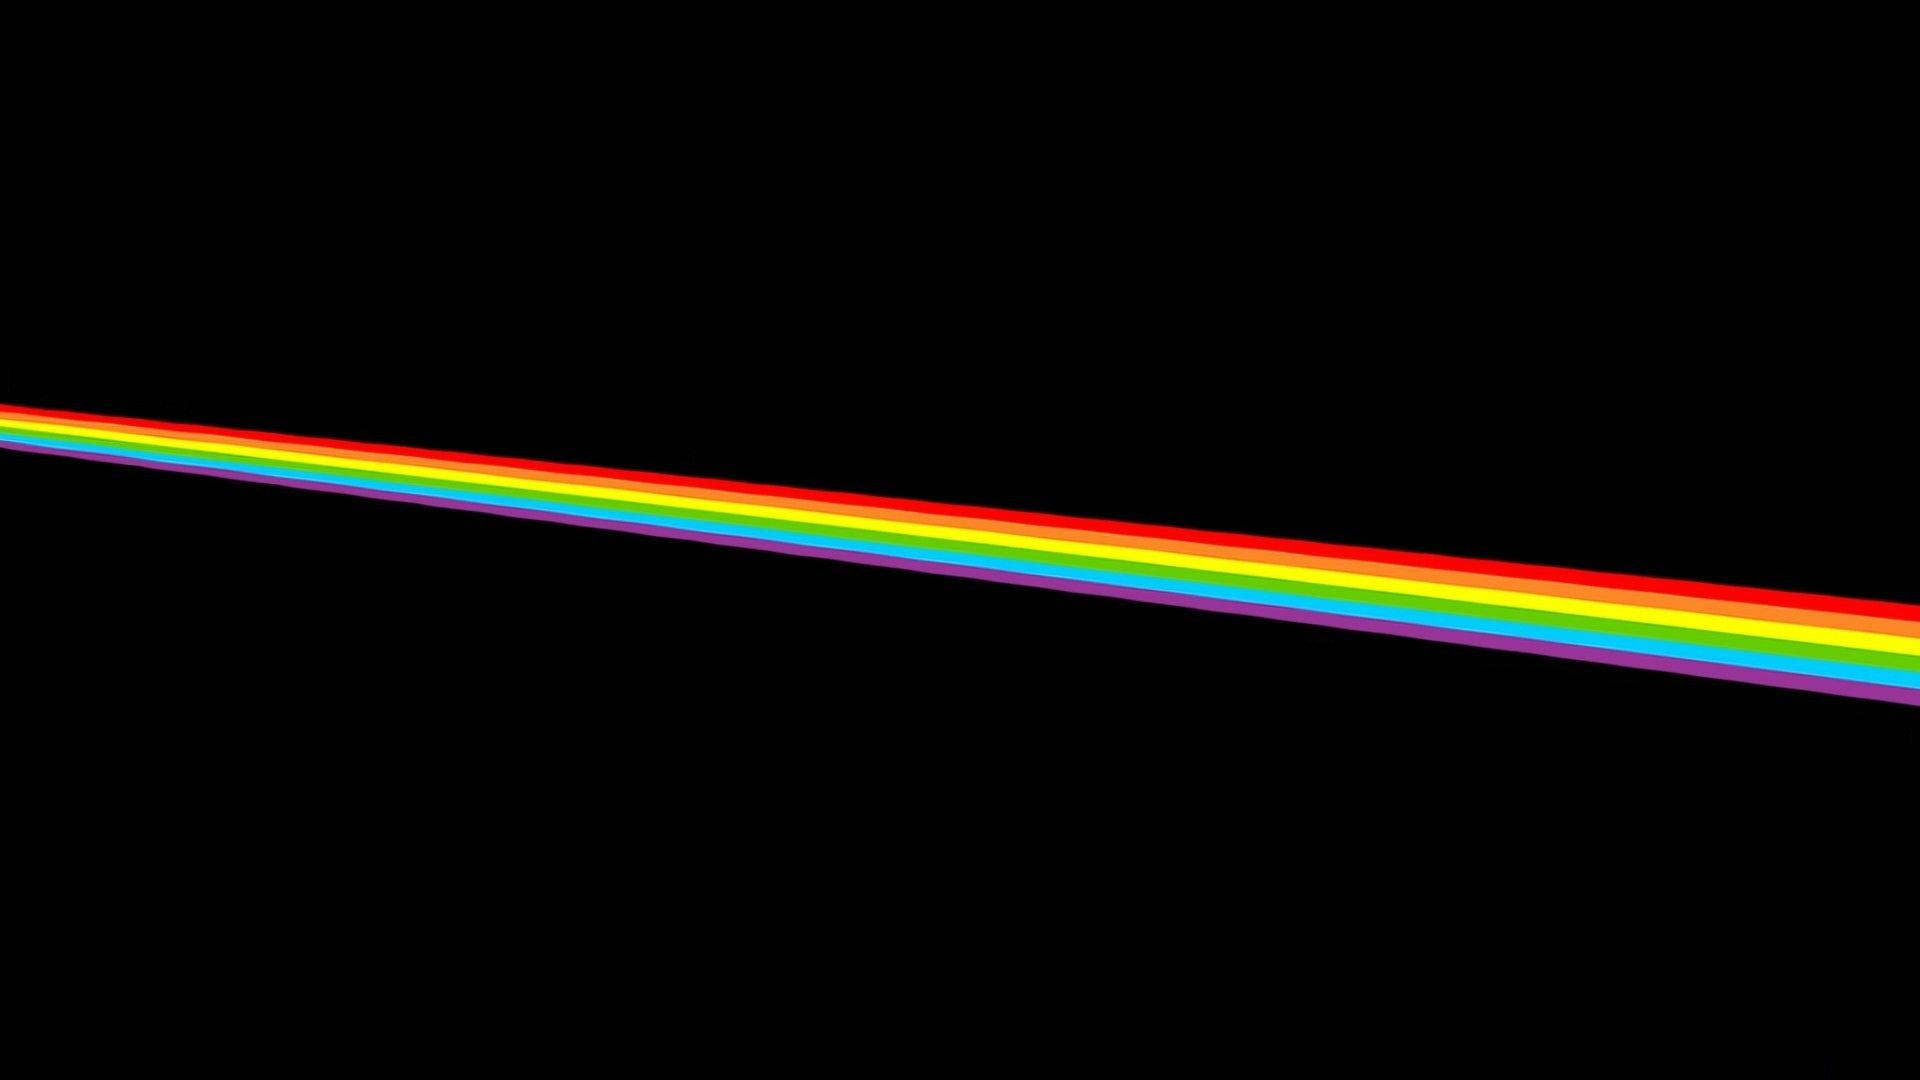 Pink Floyd's colors of harmony Wallpaper